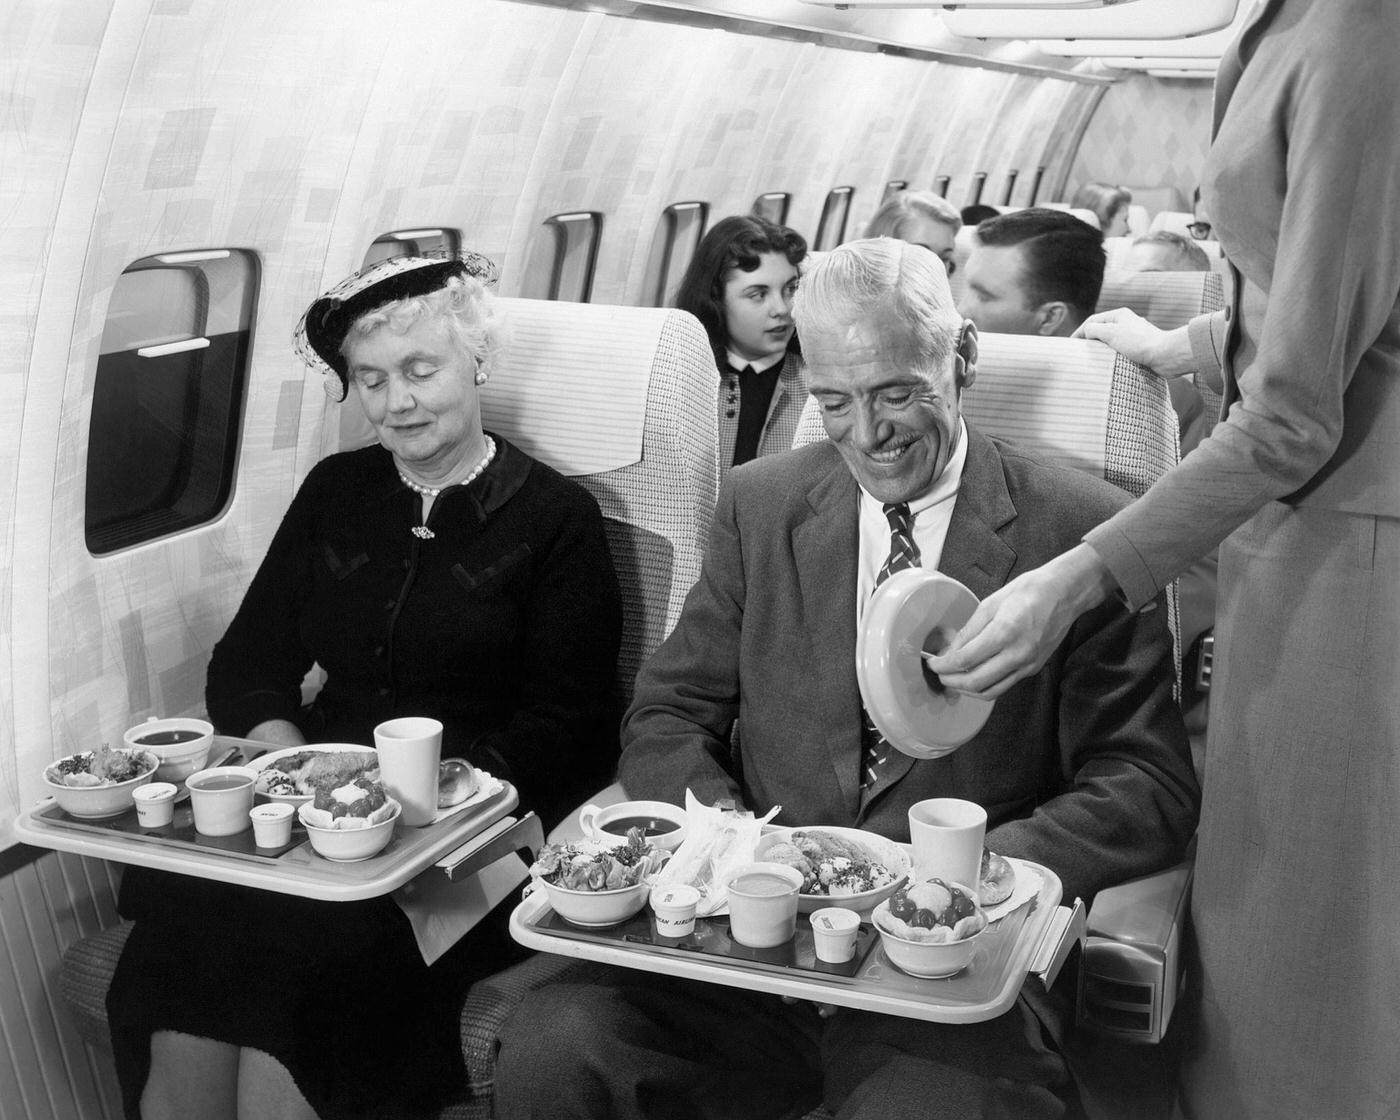 Passengers enjoying a meal inside a mock-up of the Boeing 707 Stratoliner. The development of the Stratoliner began in the 1950s during the race to capture the commercial airline market.